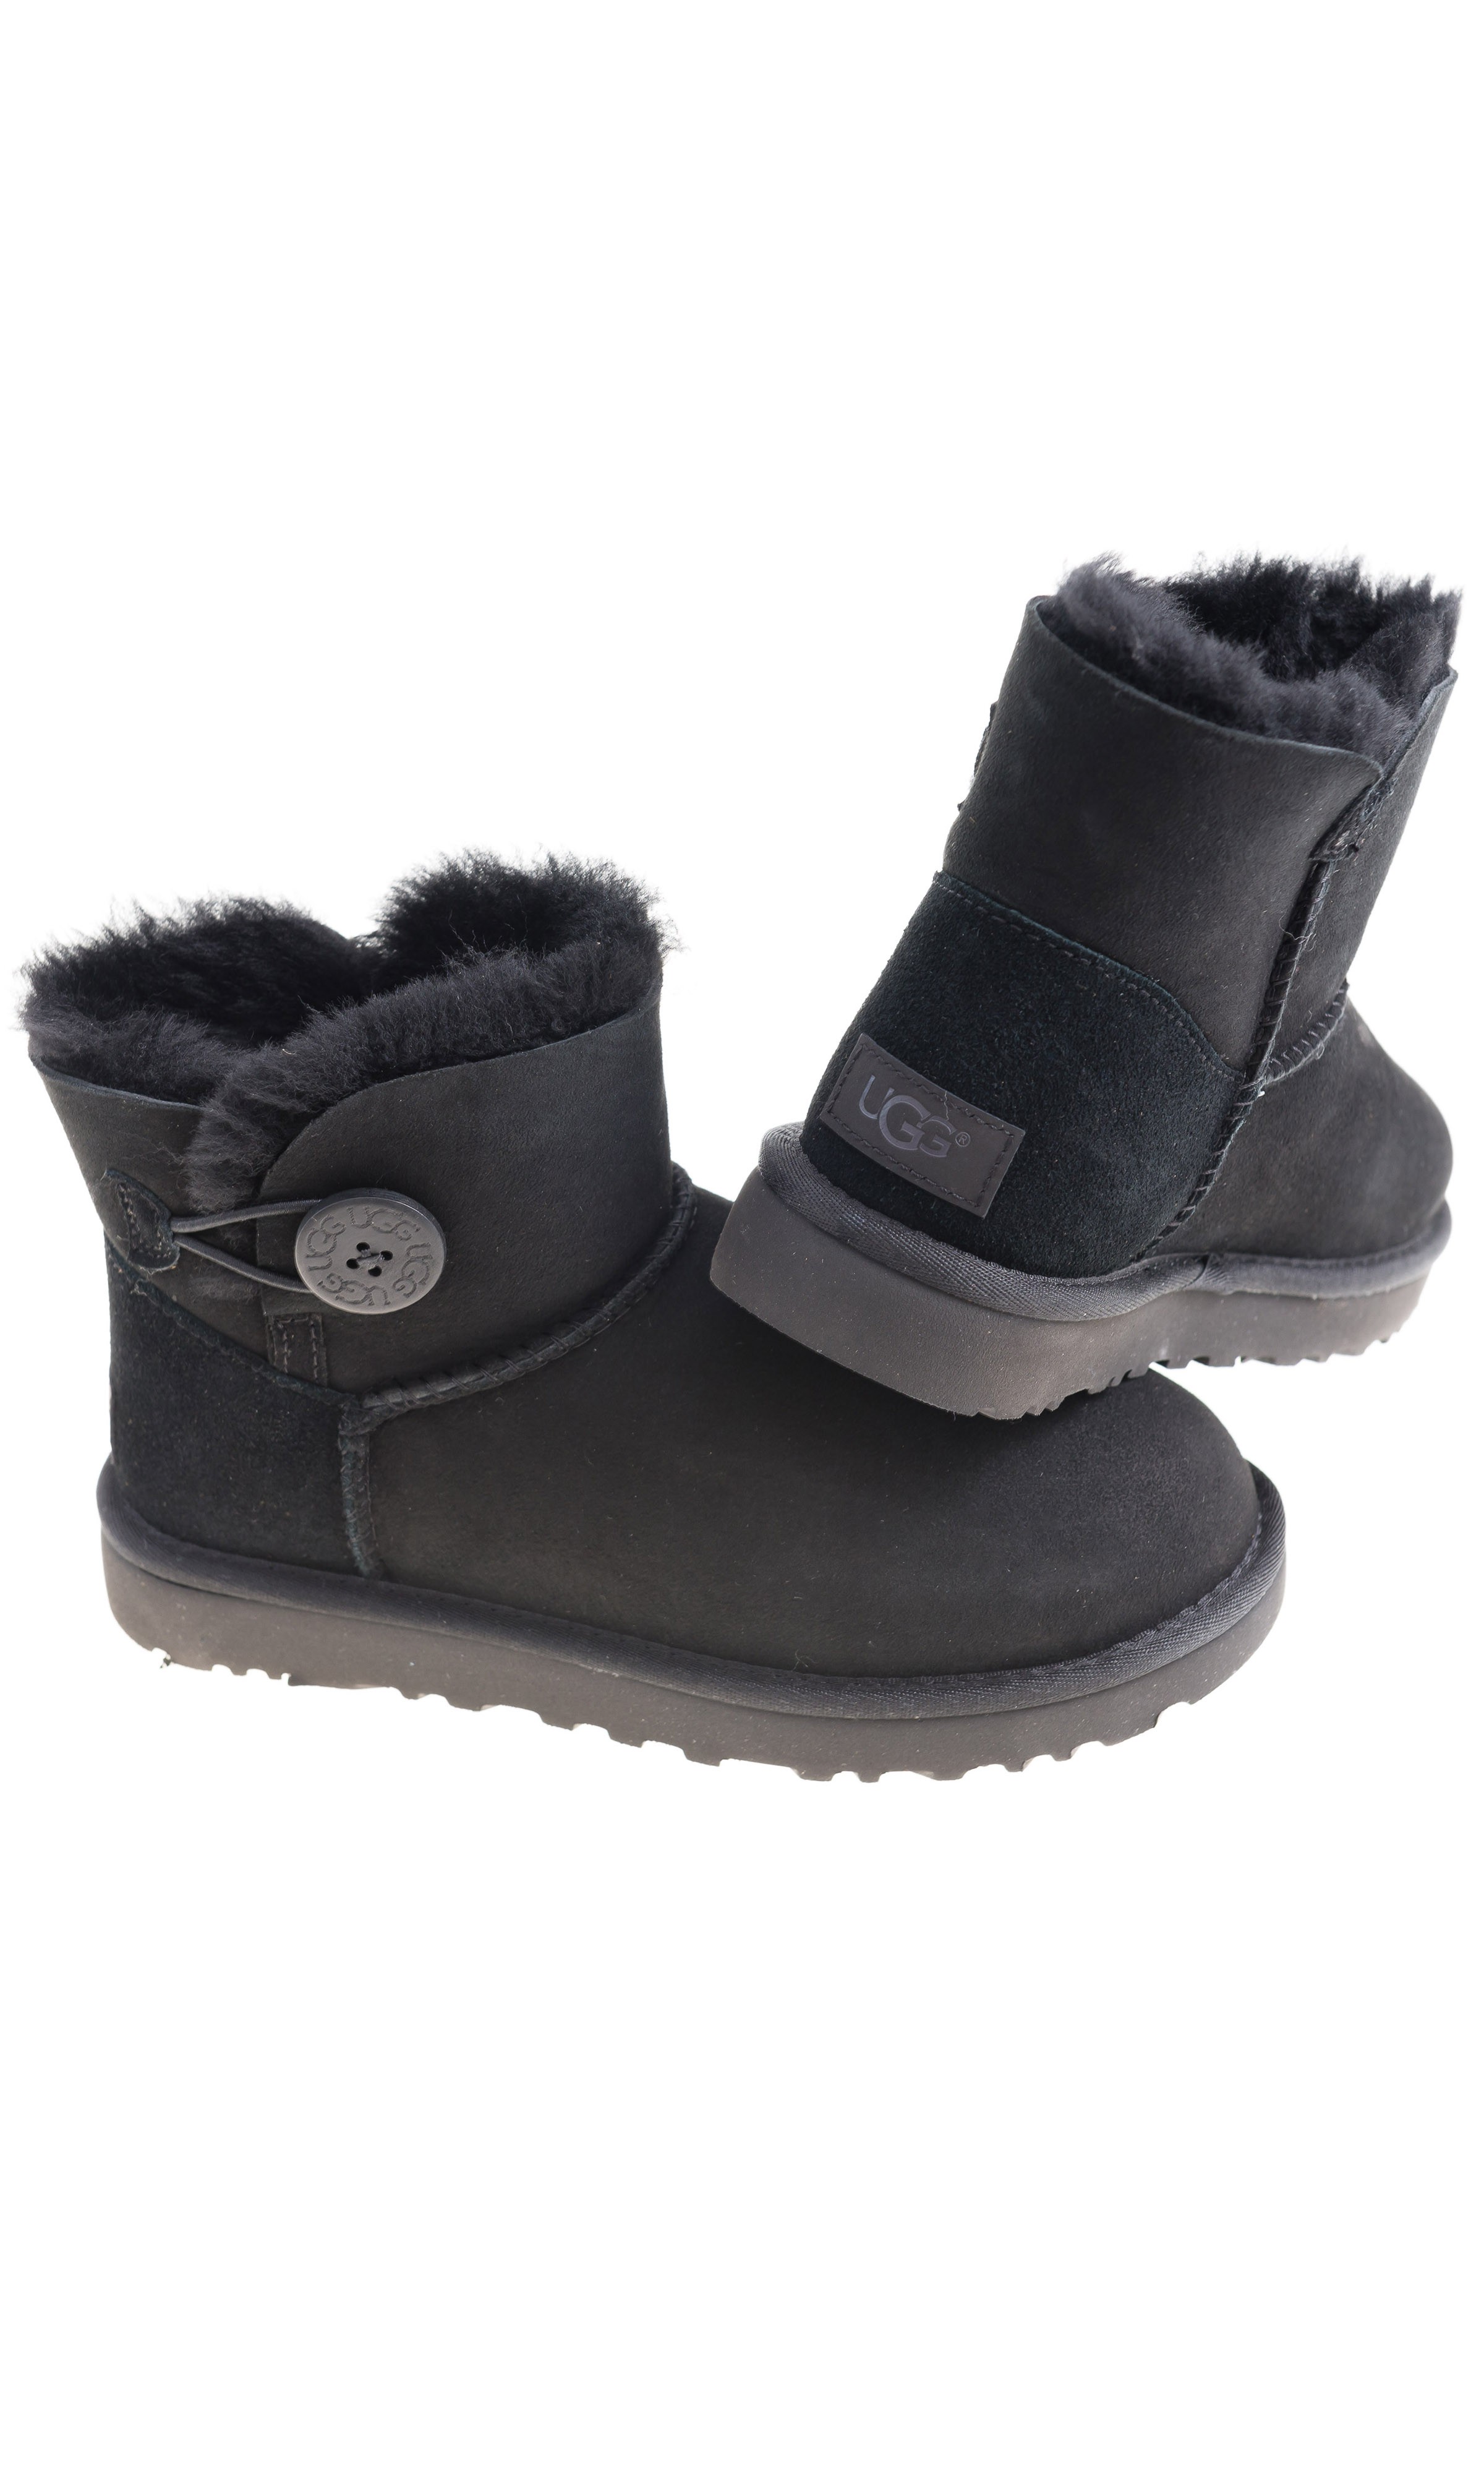 black ugg boots with buttons